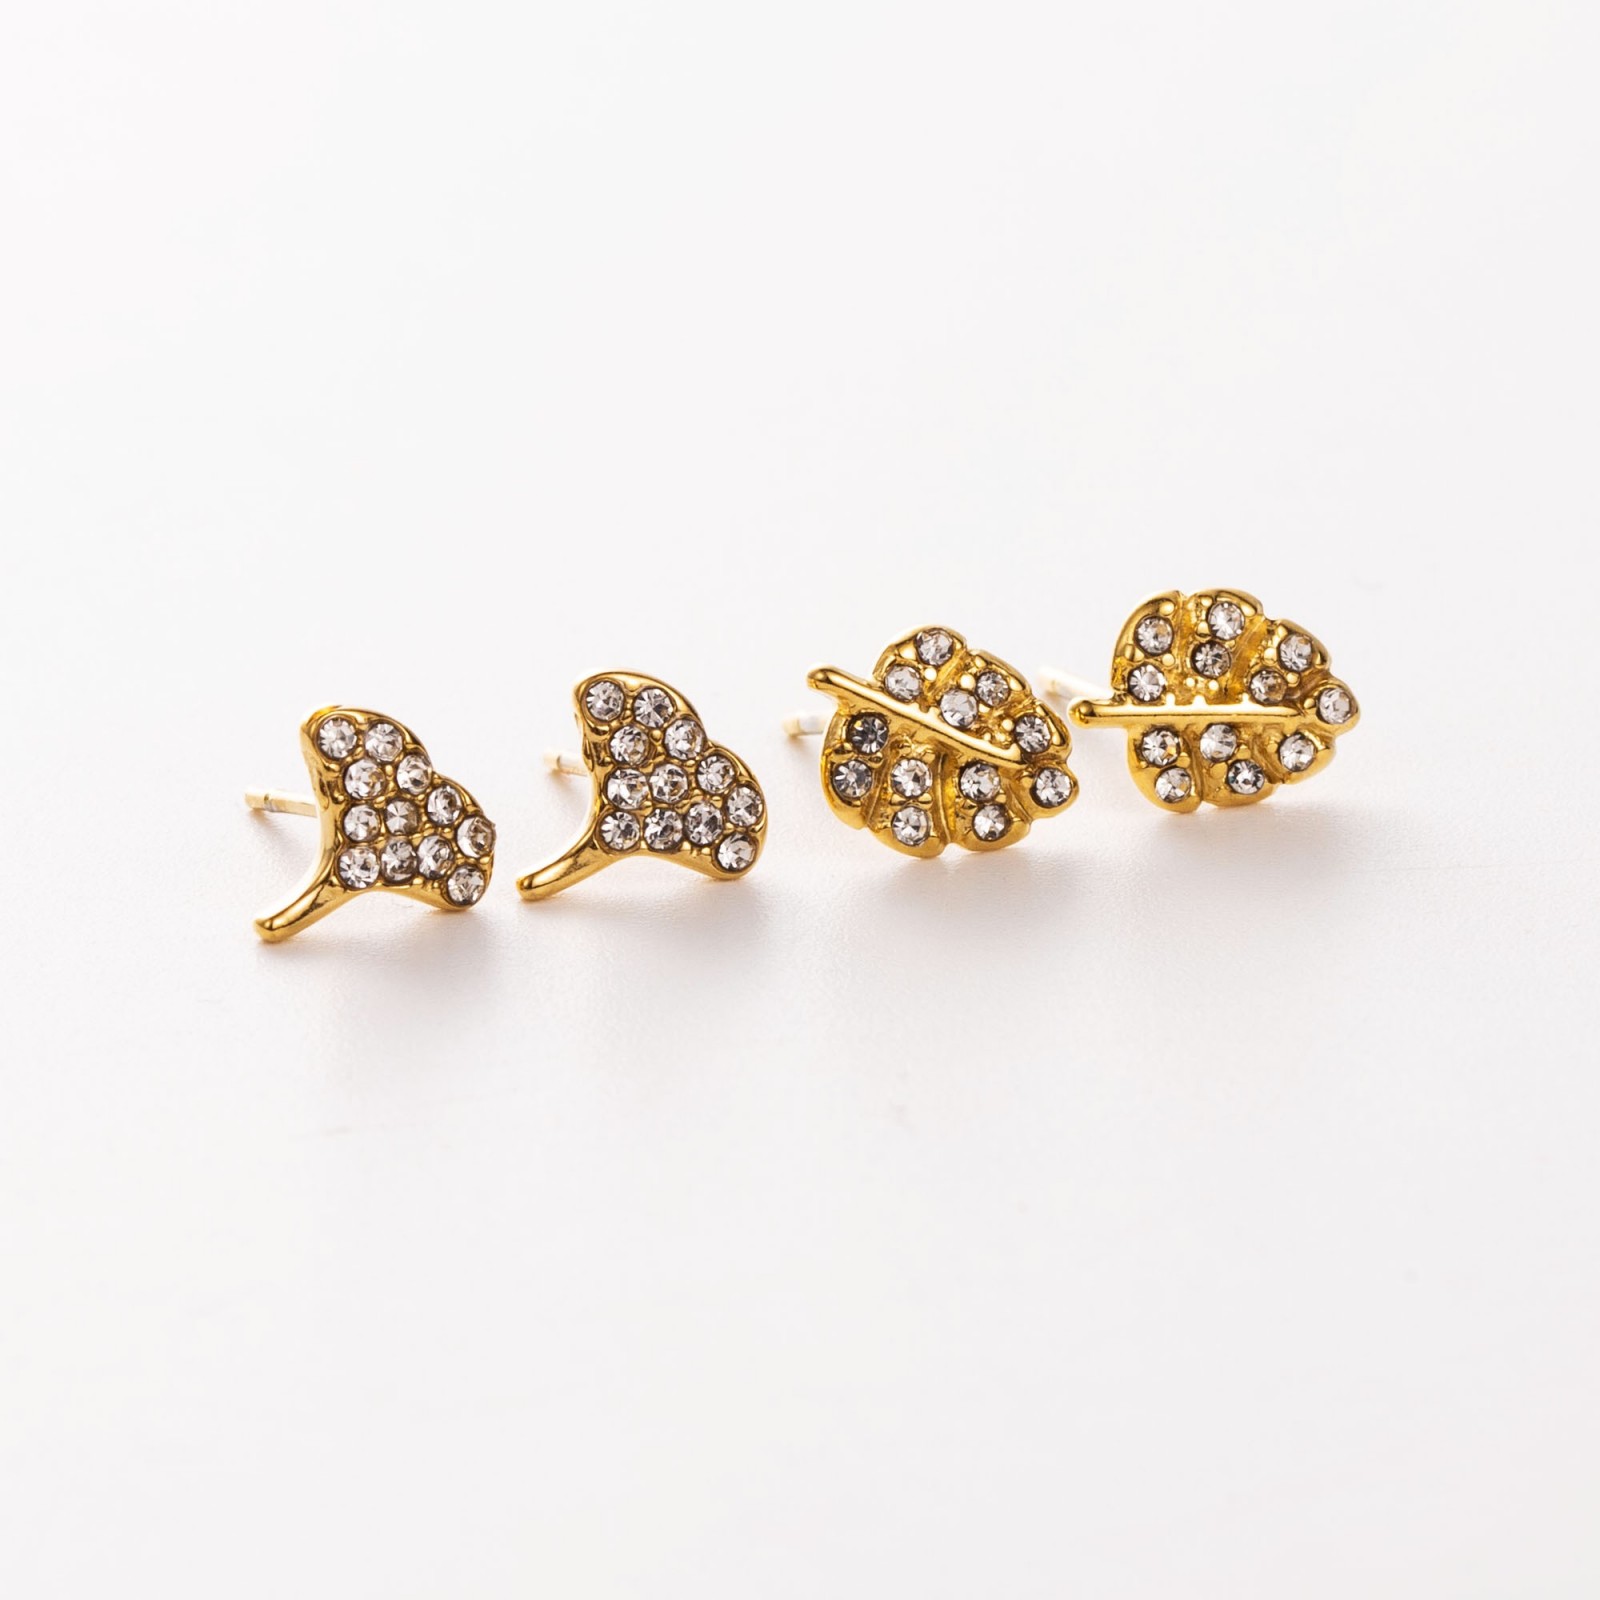 Ginkgo and Leaf Strass Studs Earrings Set 